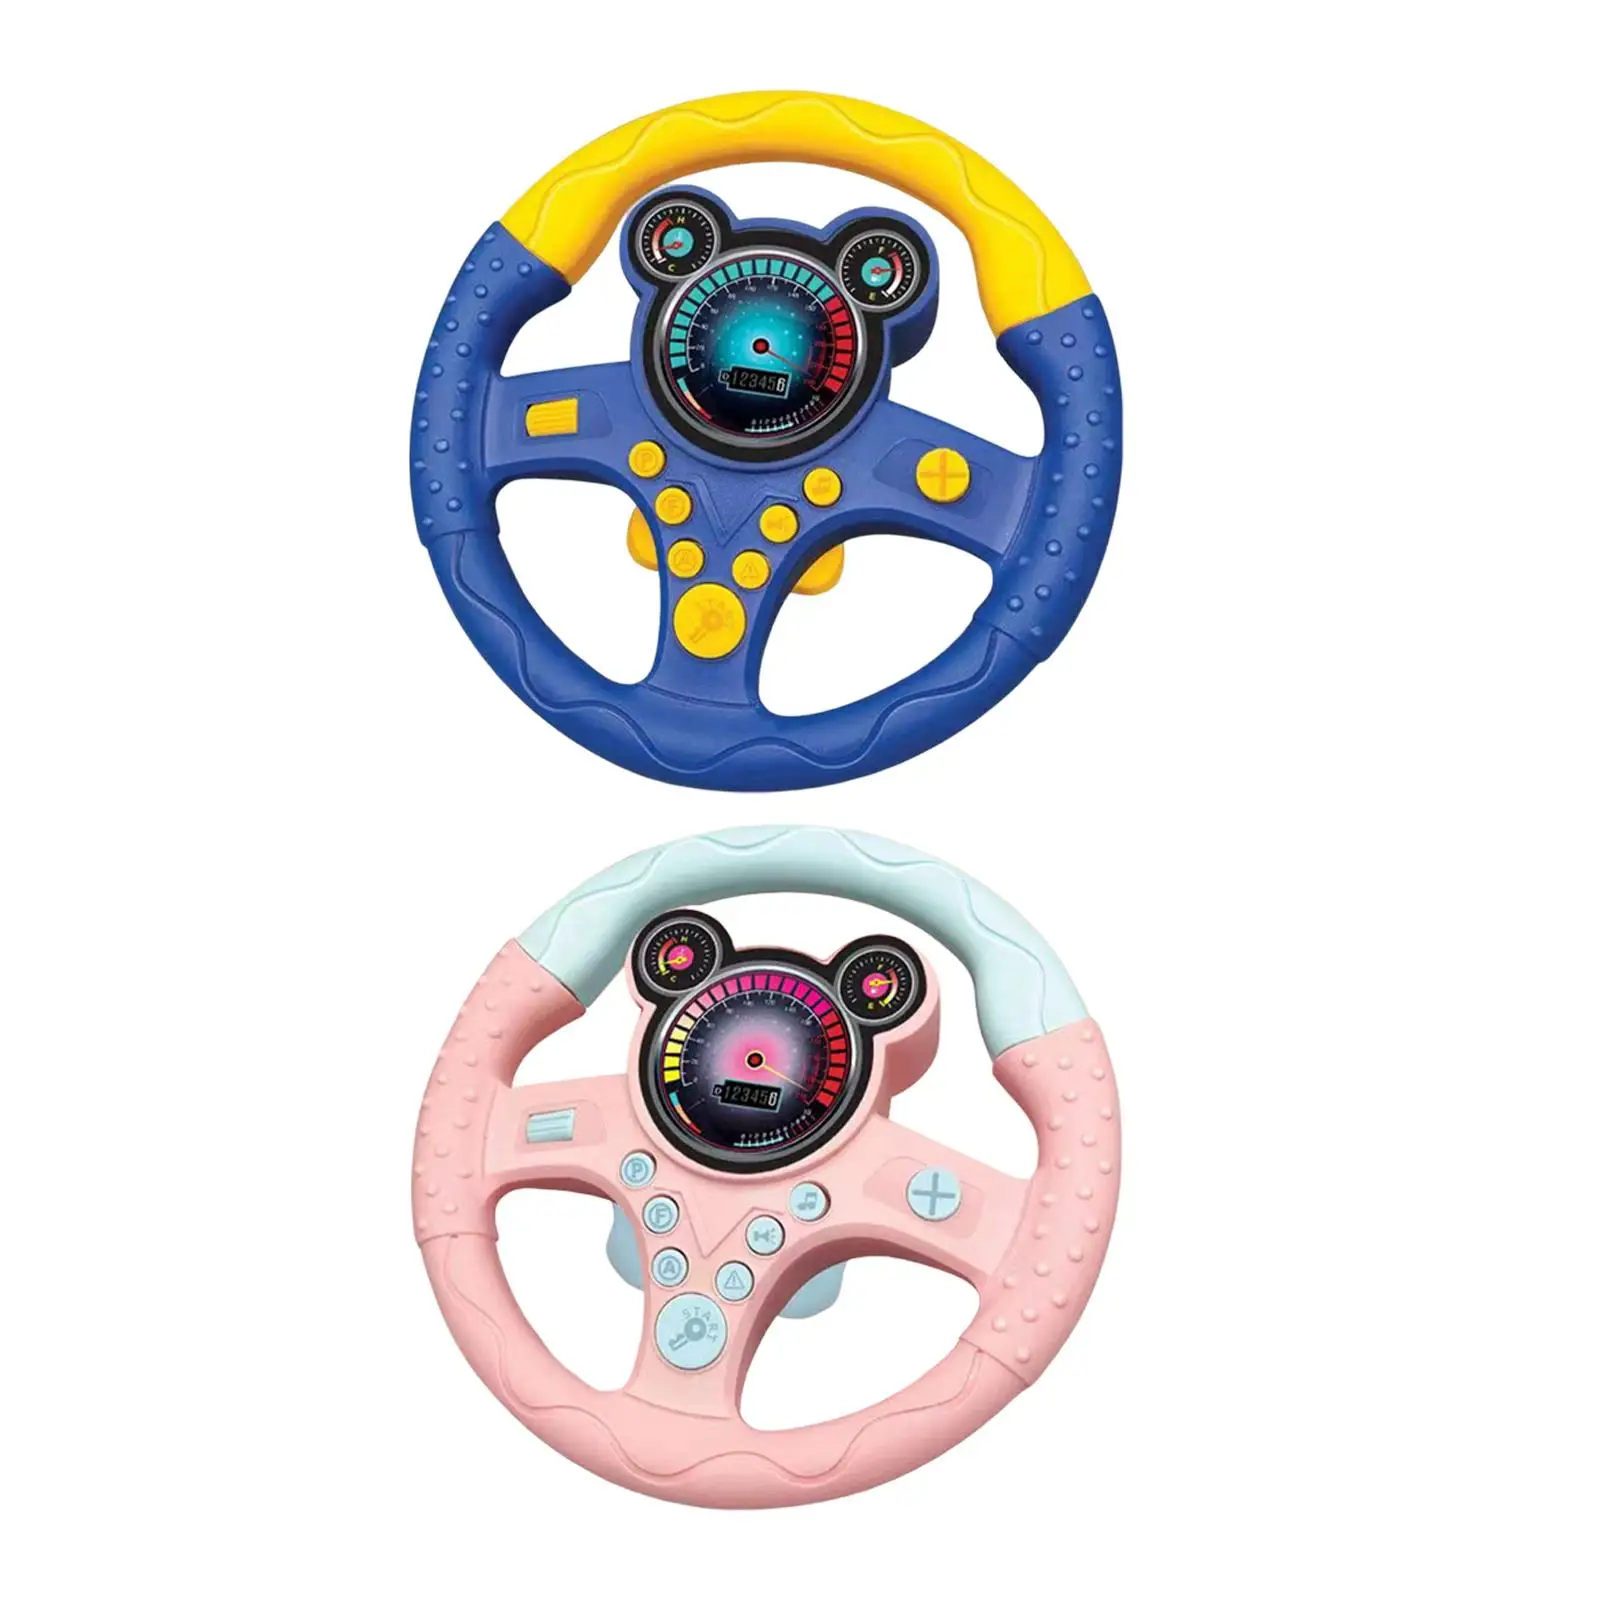 Simulation Steering Wheel Toy Musical Activity Toy Pretend Driving Toy for Park Treehouse Playground Garden Gifts